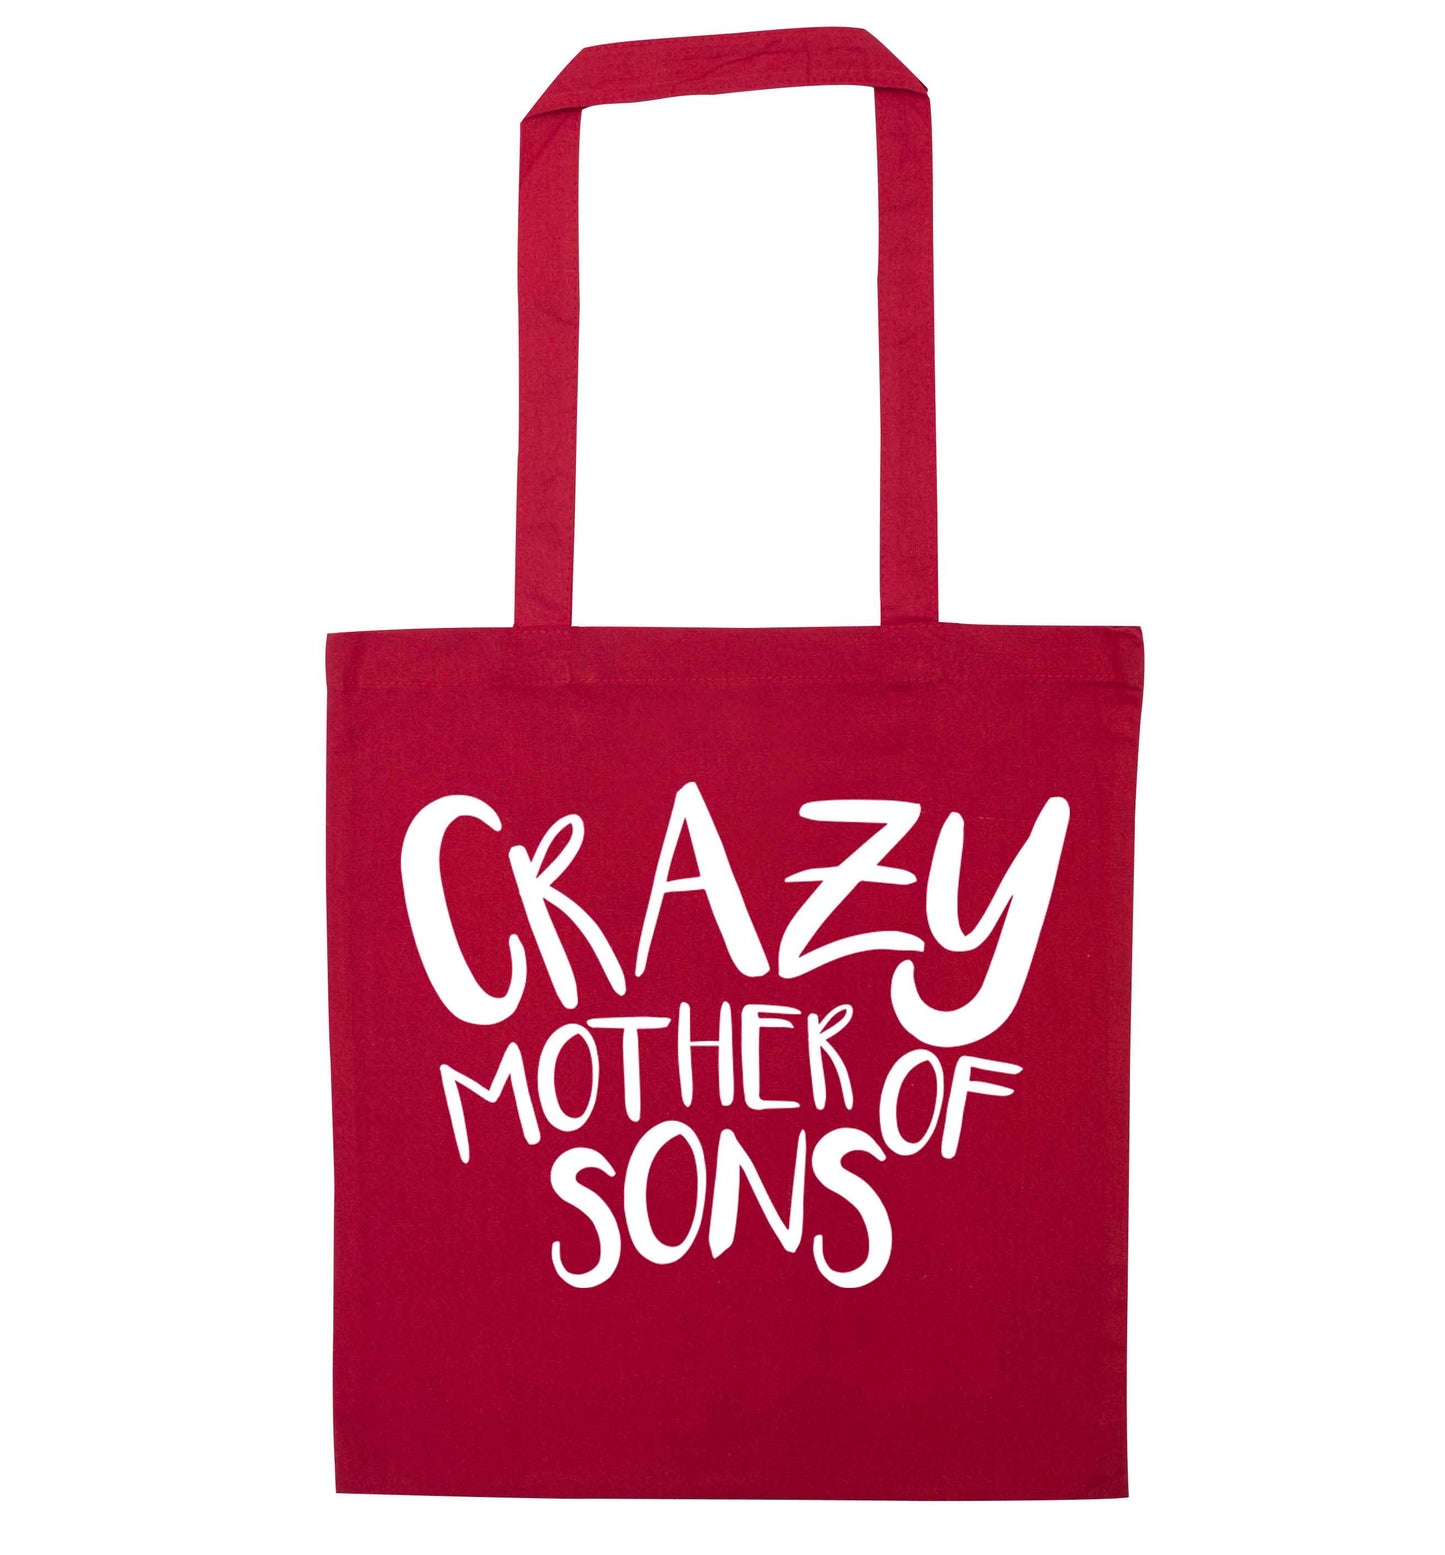 Crazy mother of sons red tote bag